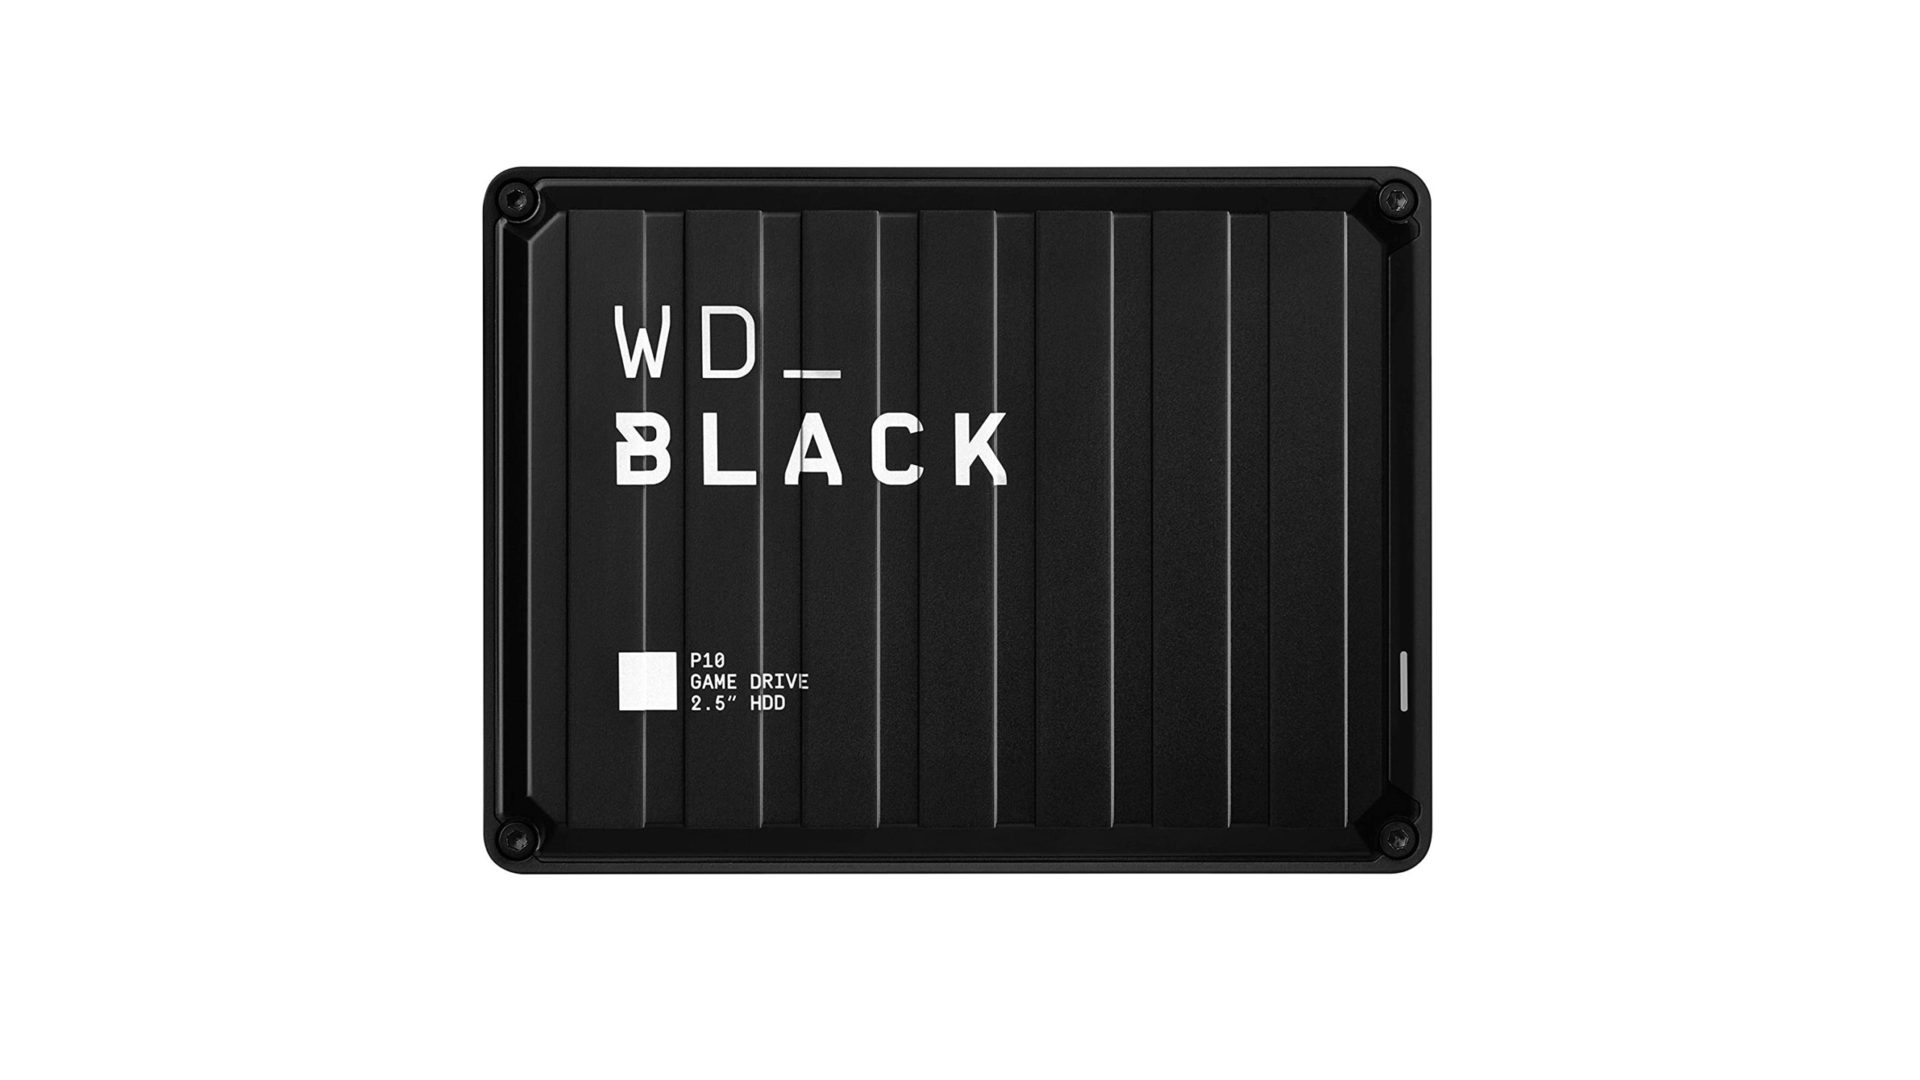 WD Black P10 hard drive on a white background